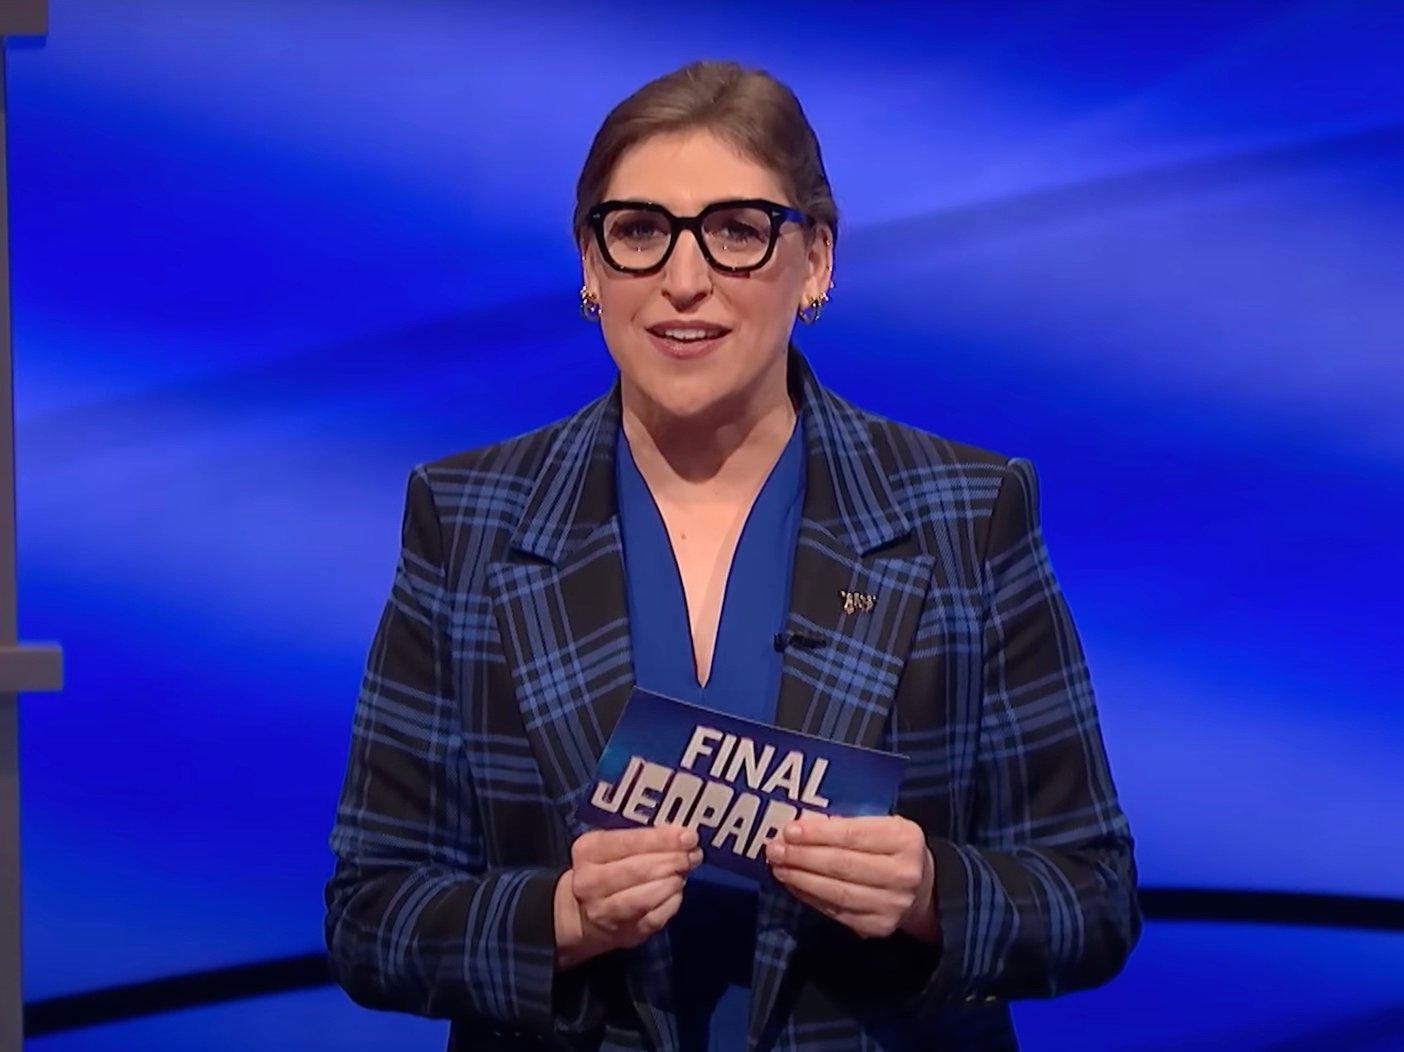 Show Gossip Says Mayim Bialik Apparently Warned By ‘Jeopardy!’ Producers She’s Losing Battle To Be Permanent Host